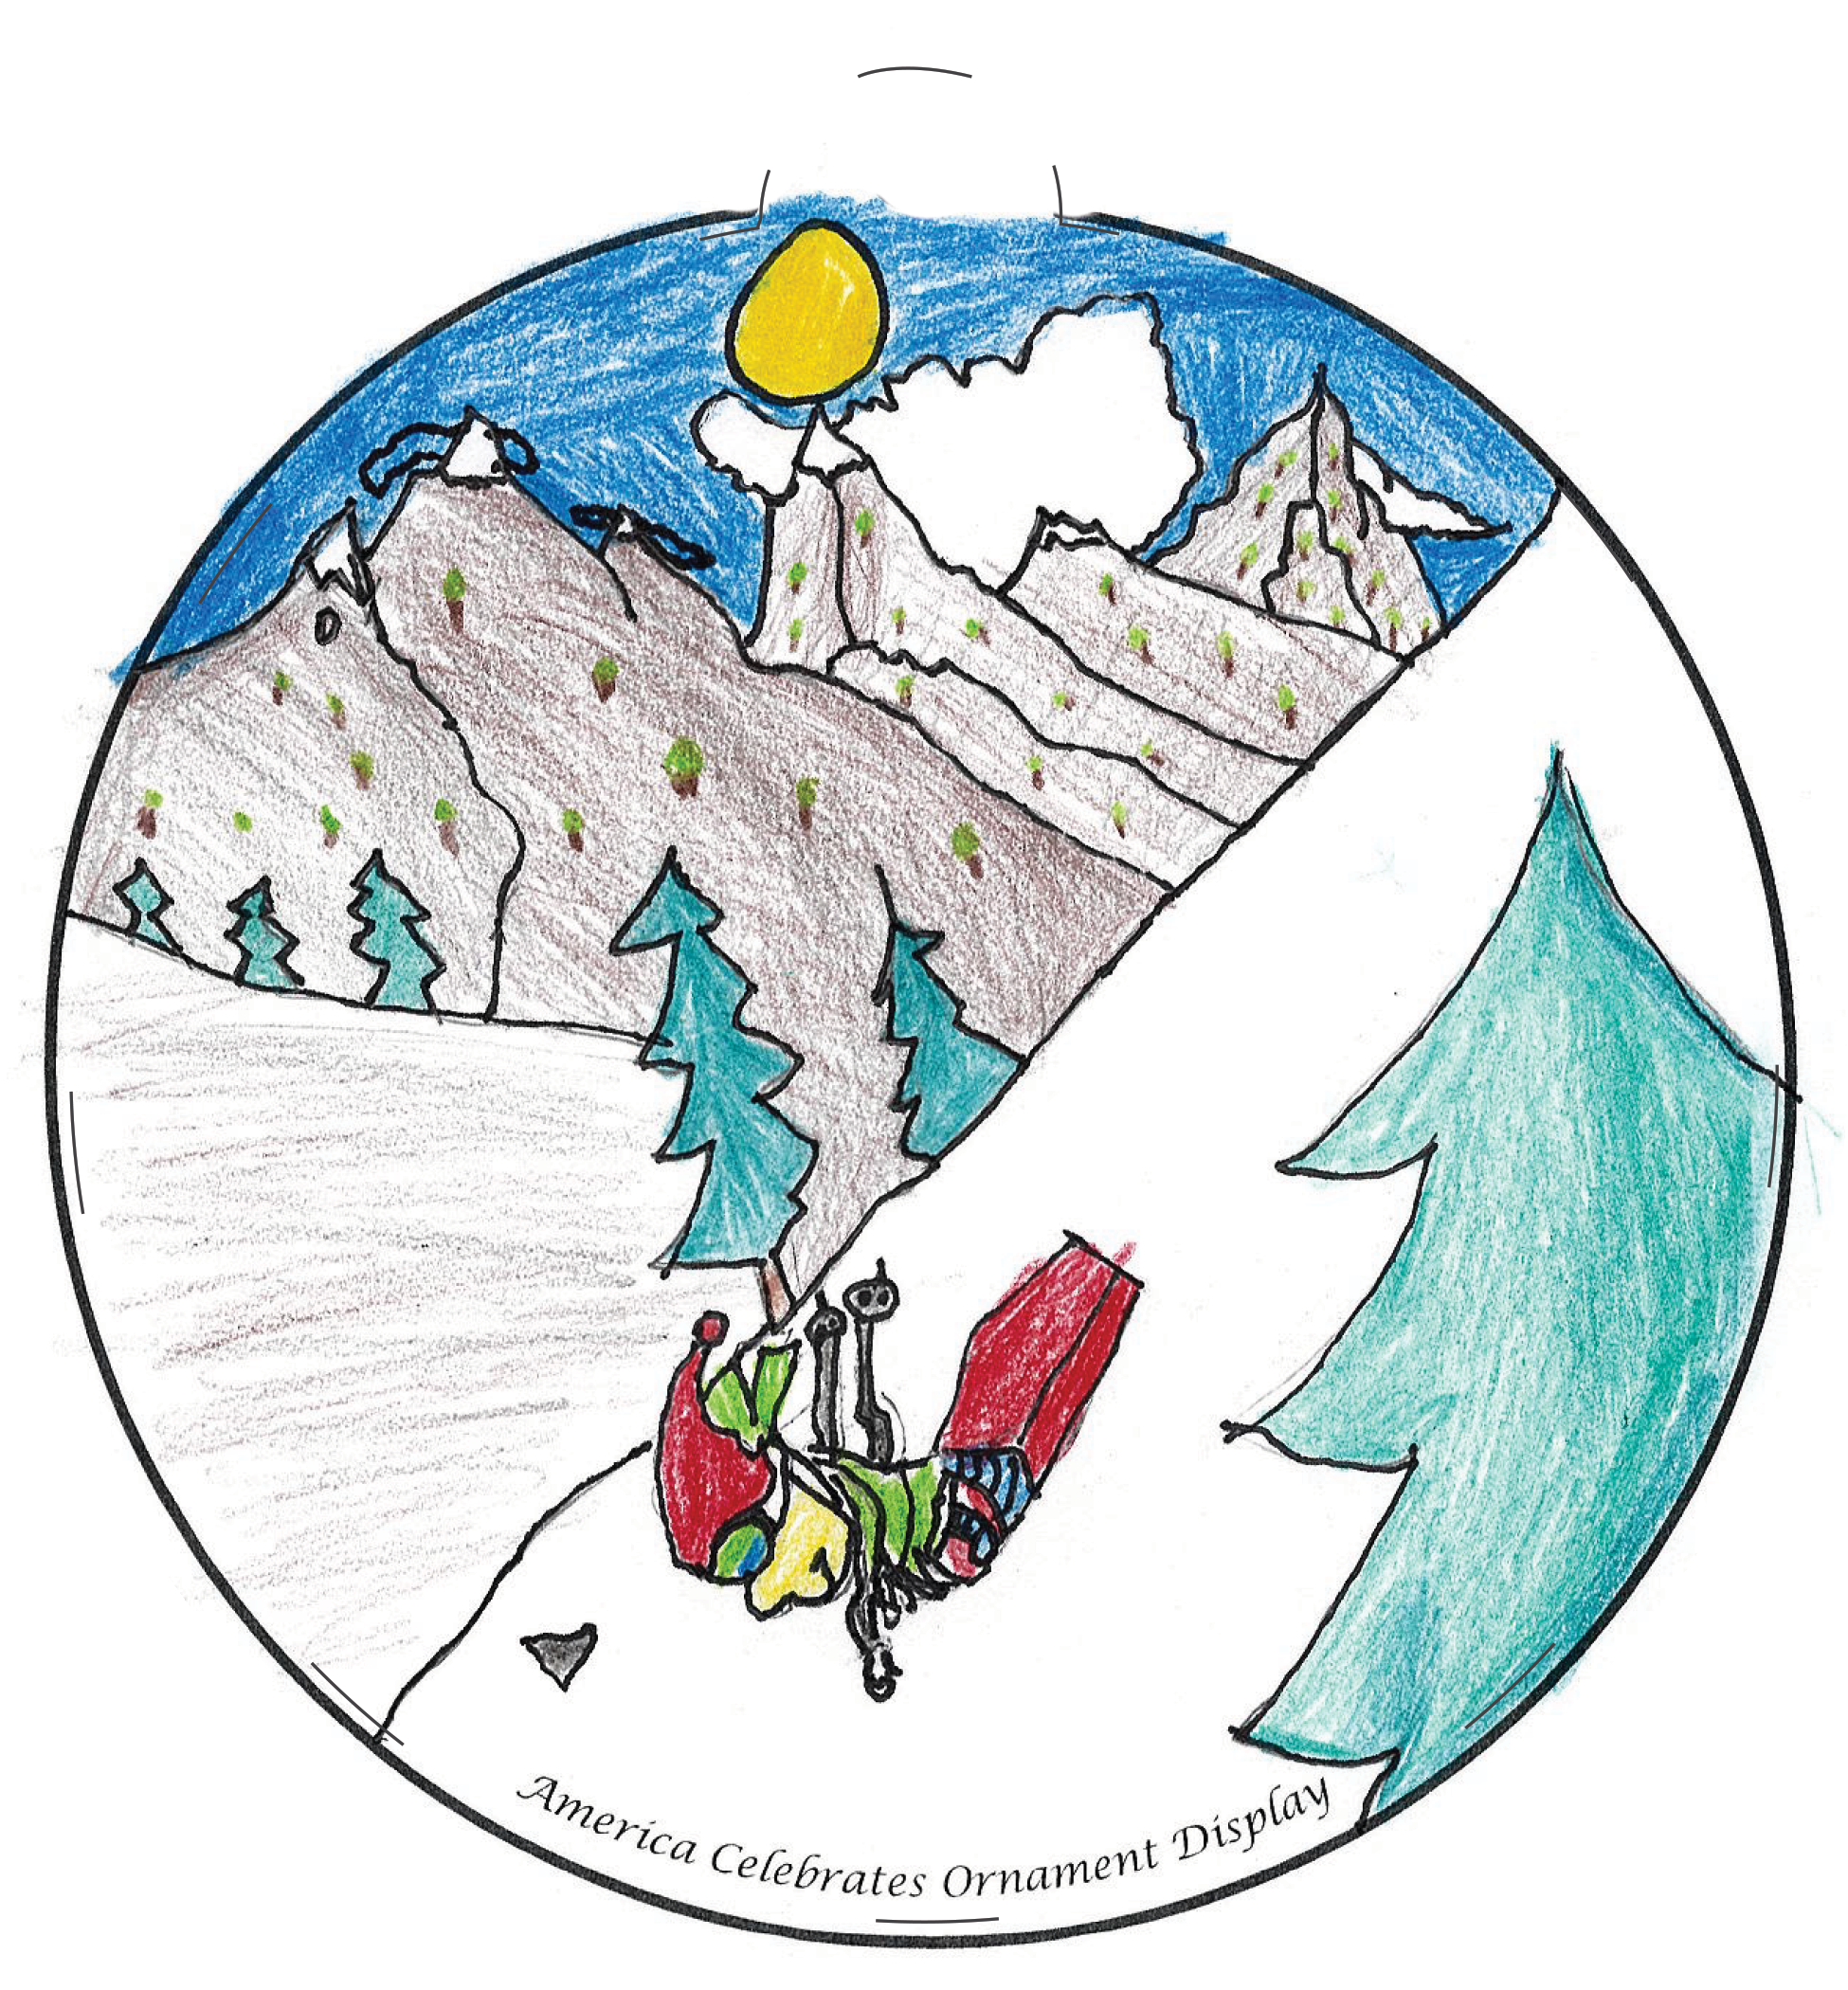 Ornament depicting elf skiing down a snowy mountain